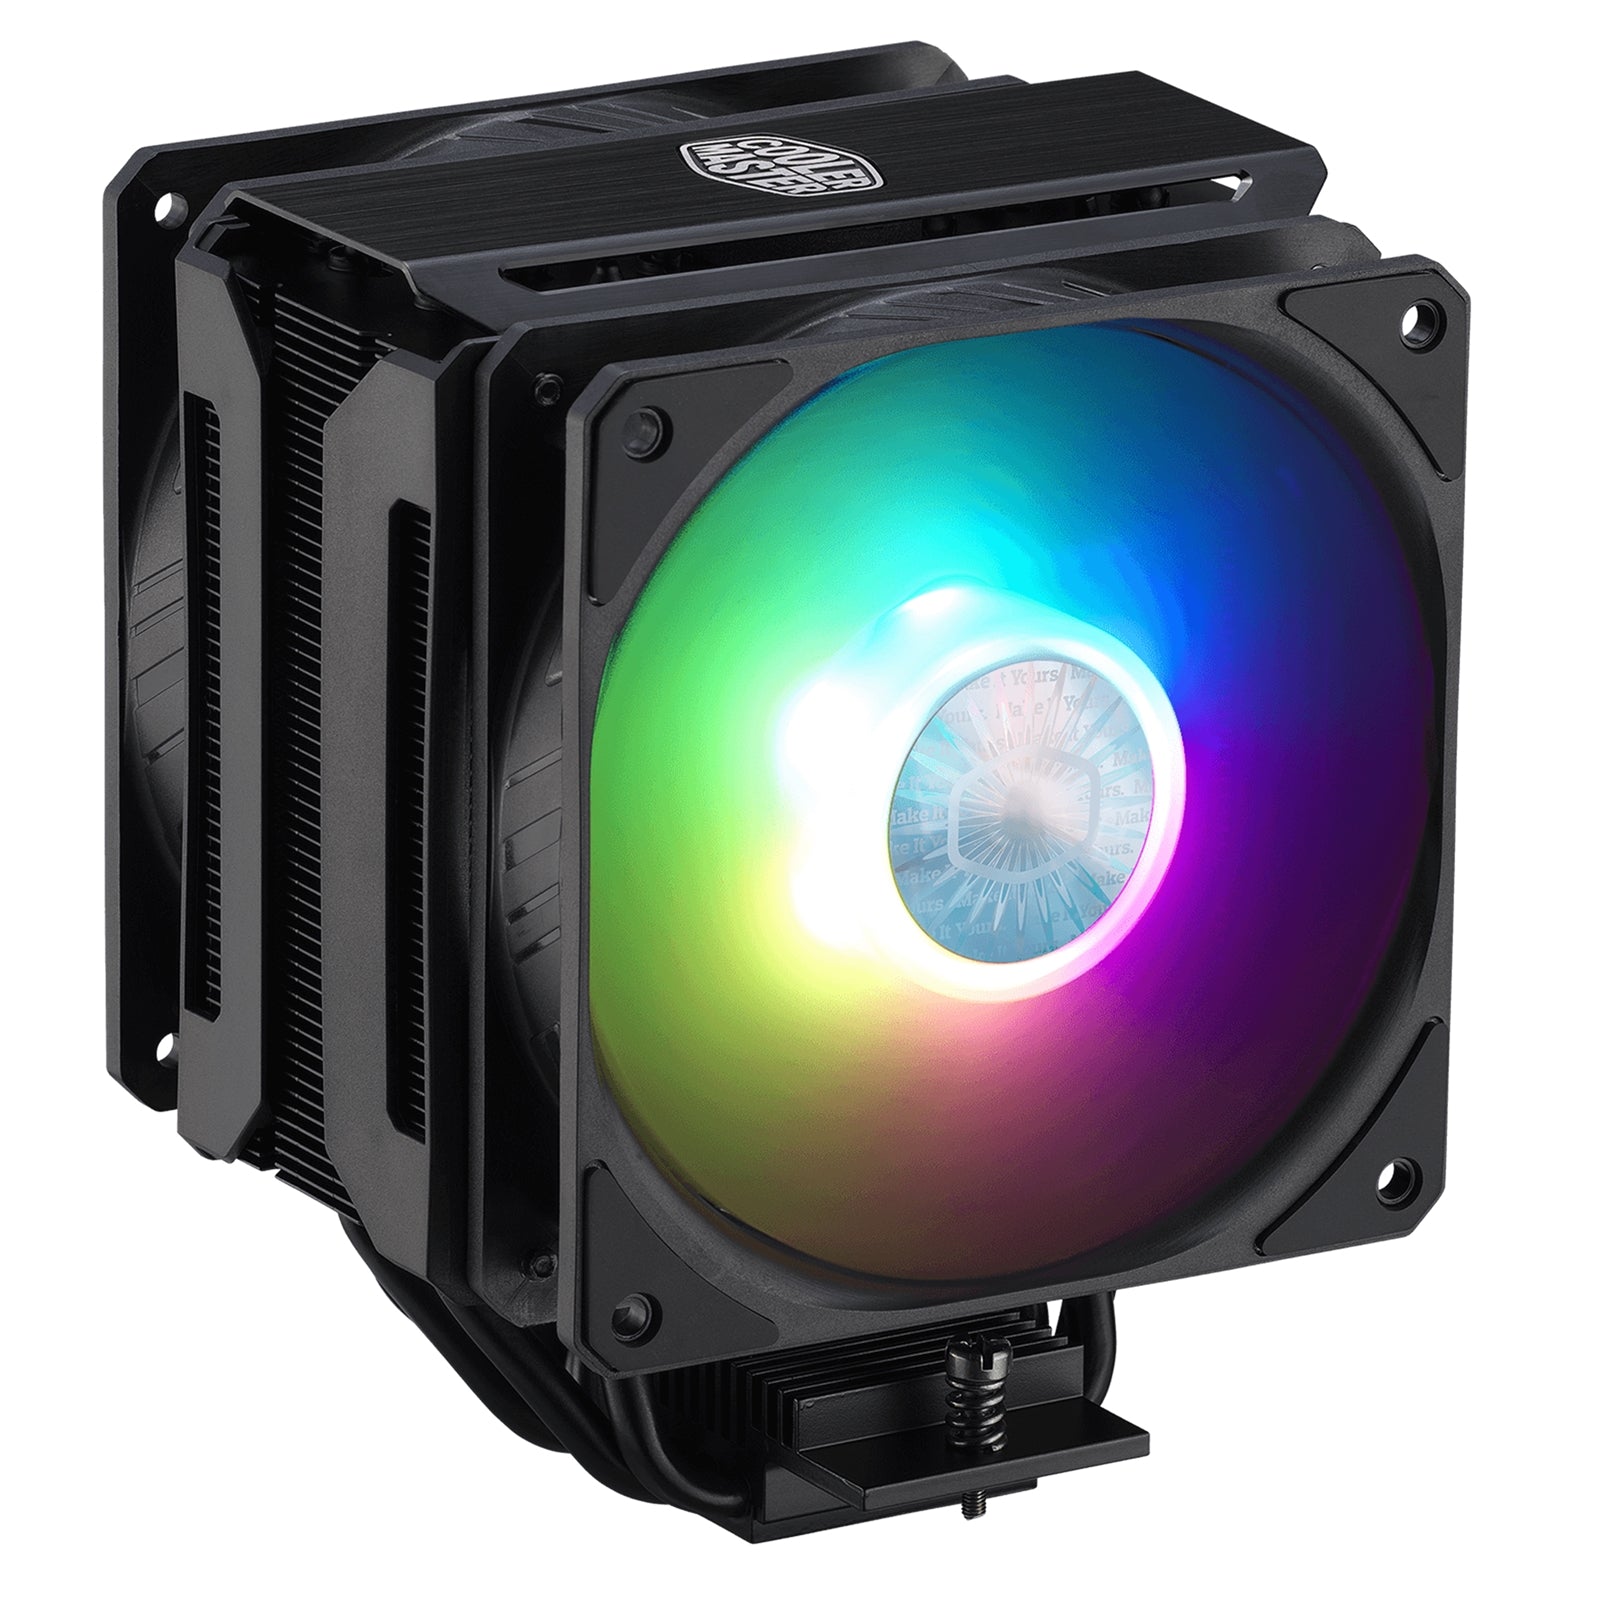 COOLER MASTER Stealth ARGB CPU Cooler Dual SickleFlow 120mm Fans, 6 Heat Pipes, RGB Controller